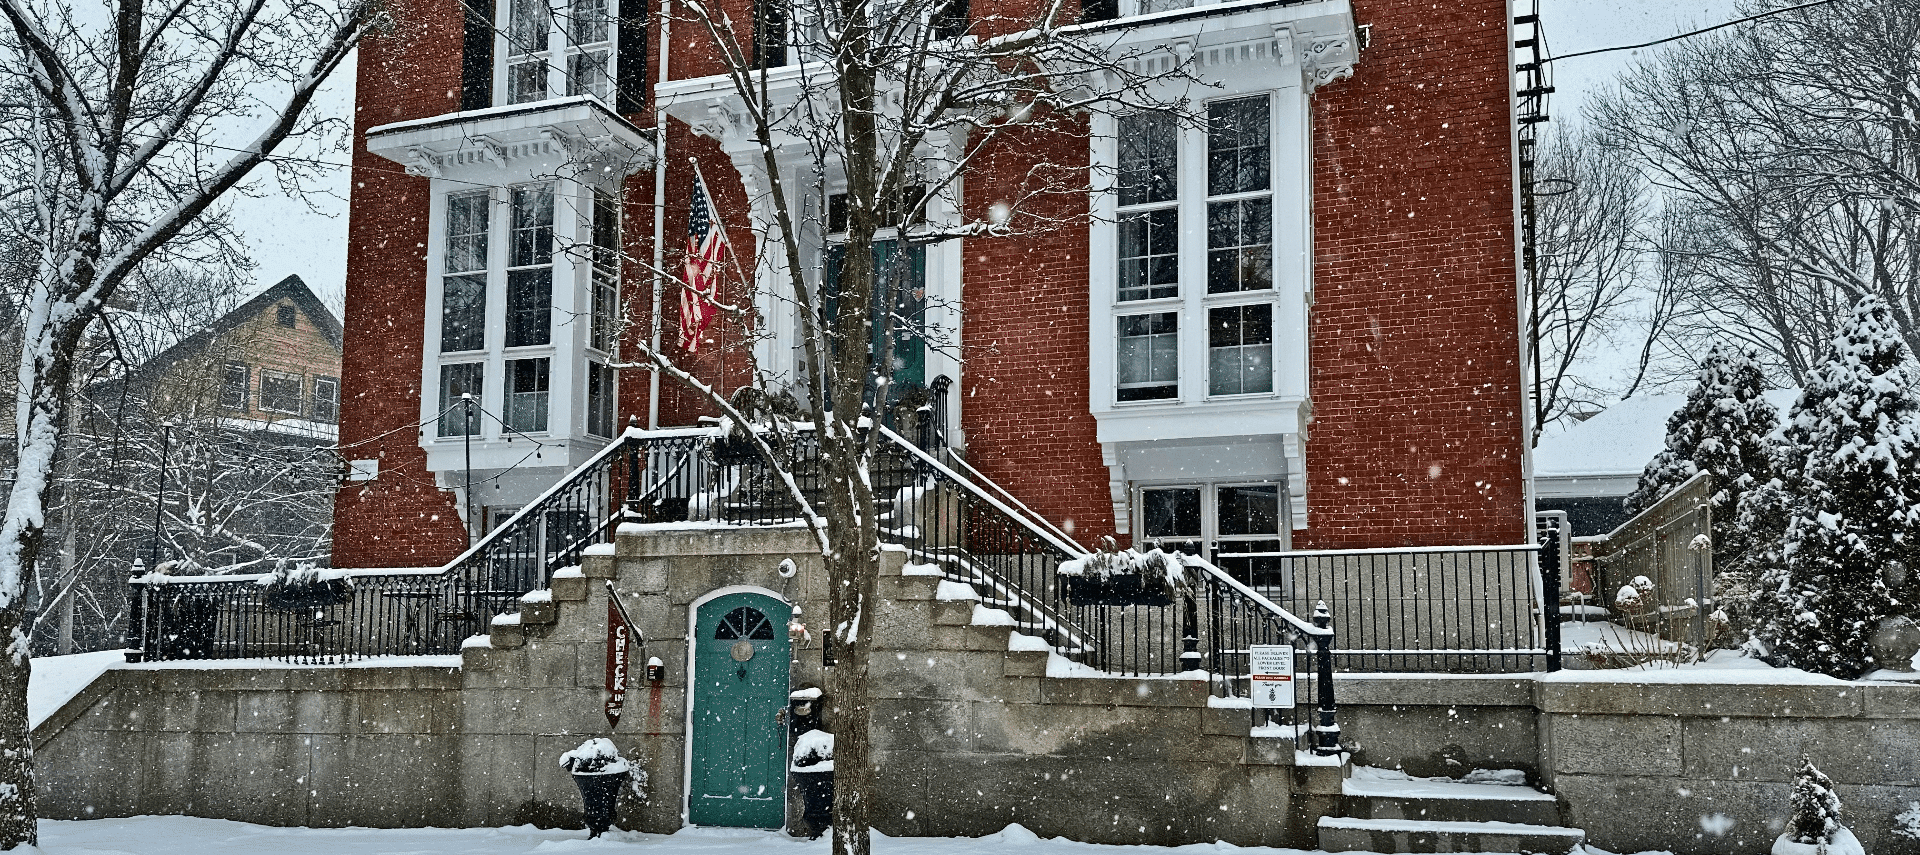 Snow falling with a large brick building in the foreground.